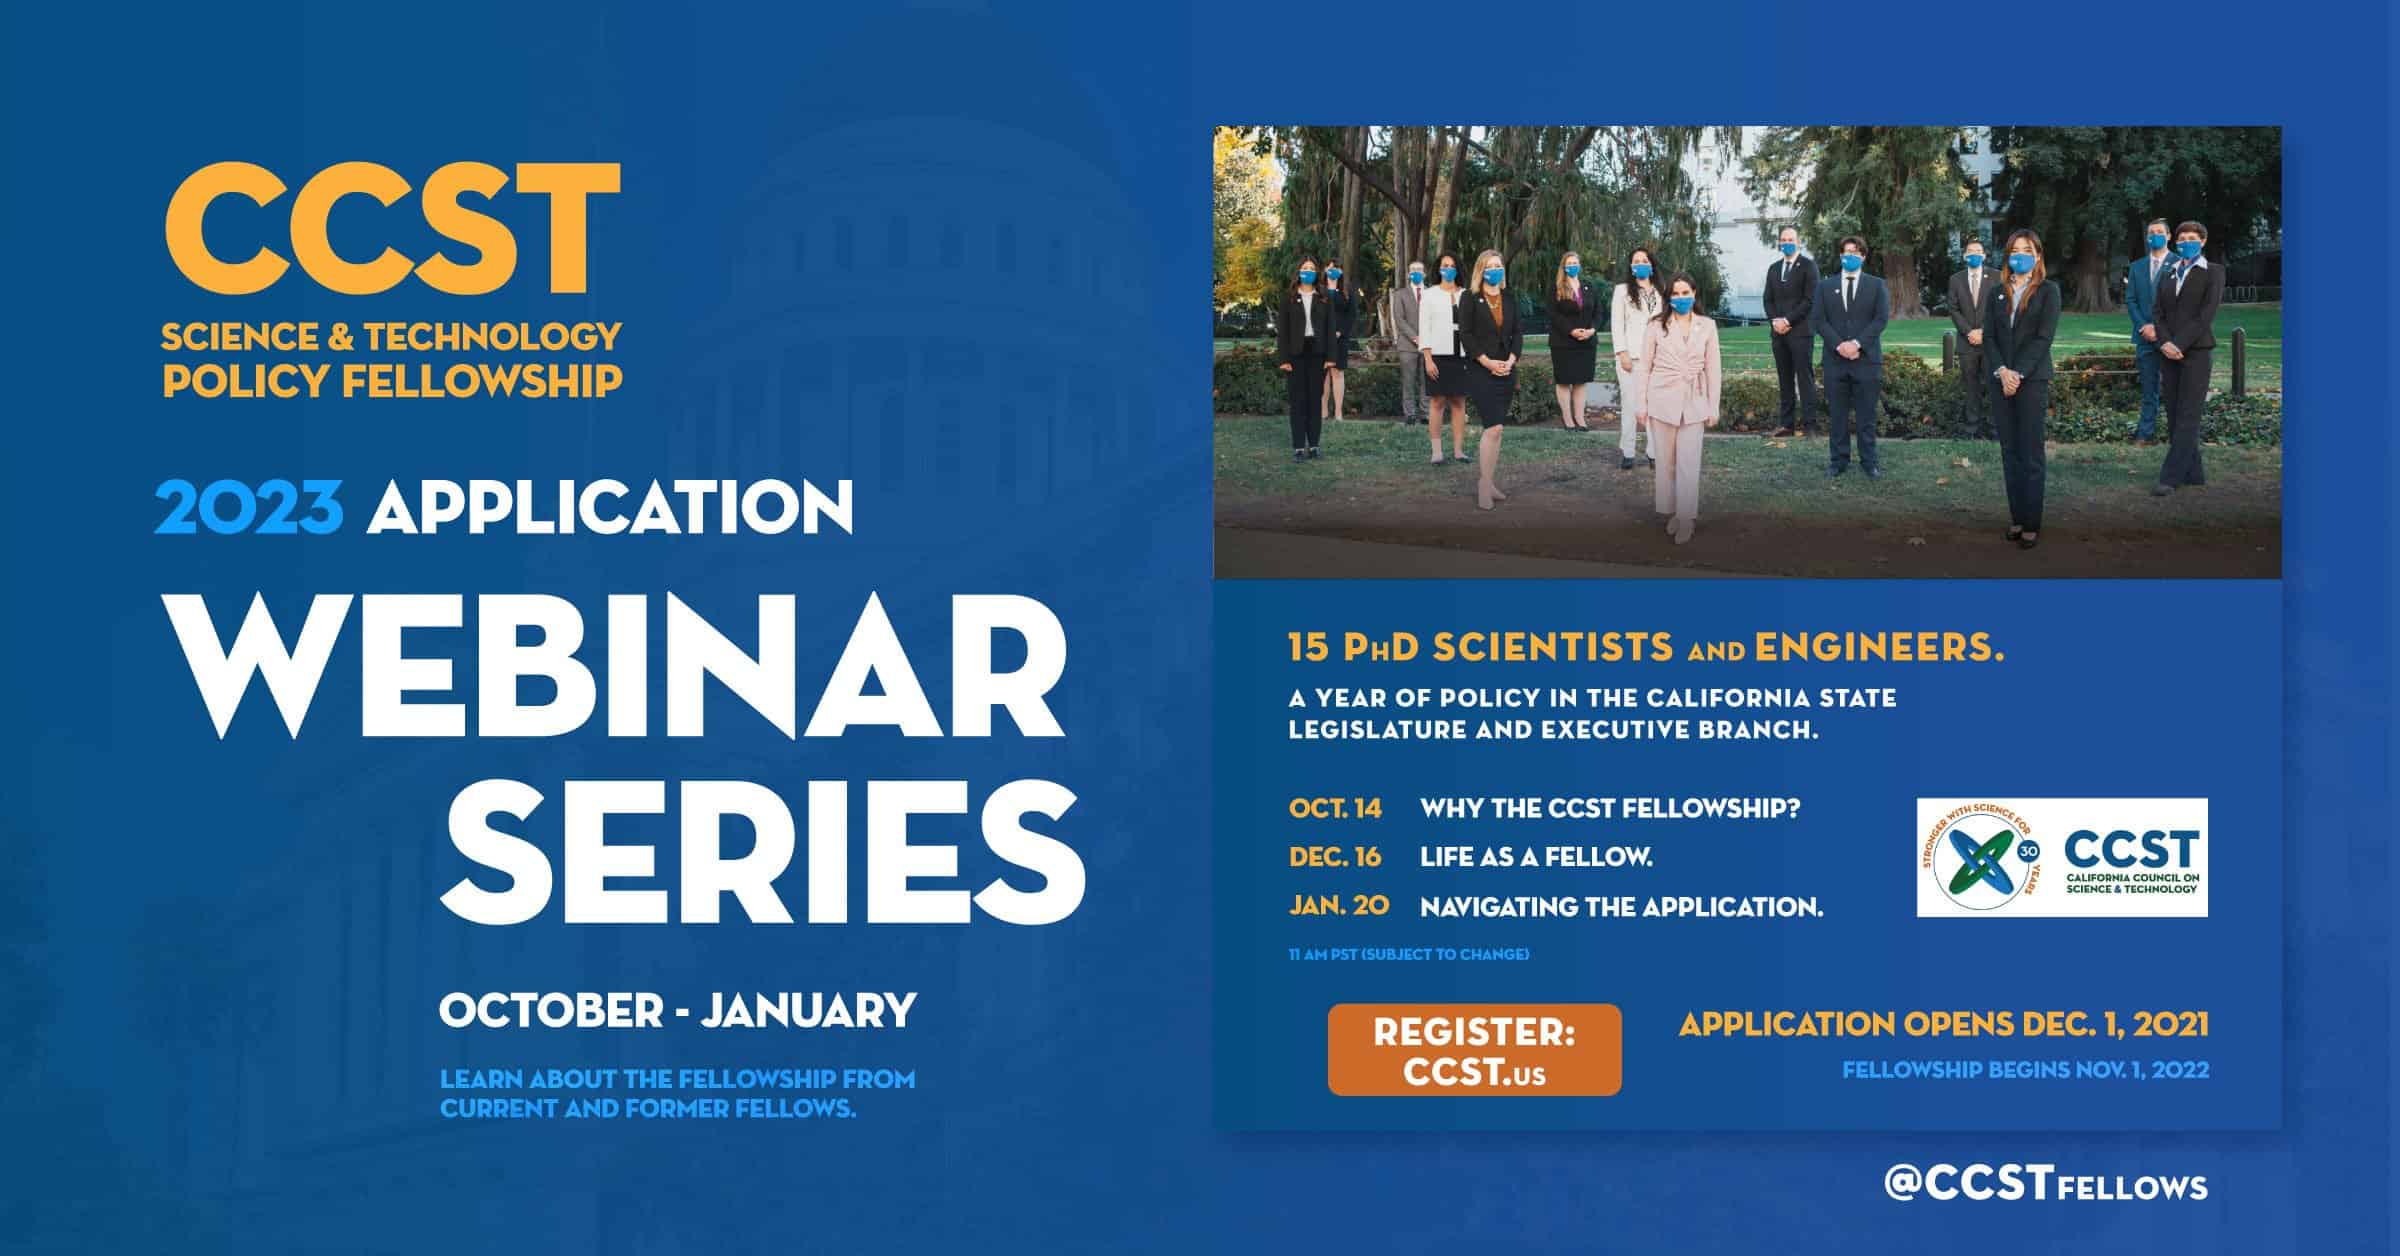 Digital flyer with blue background overlaid on California Capitol and bold orange and white lettering with title and listing of upcoming webinars, photo of 2021 Fellows in masks standing on the Capitol grounds.